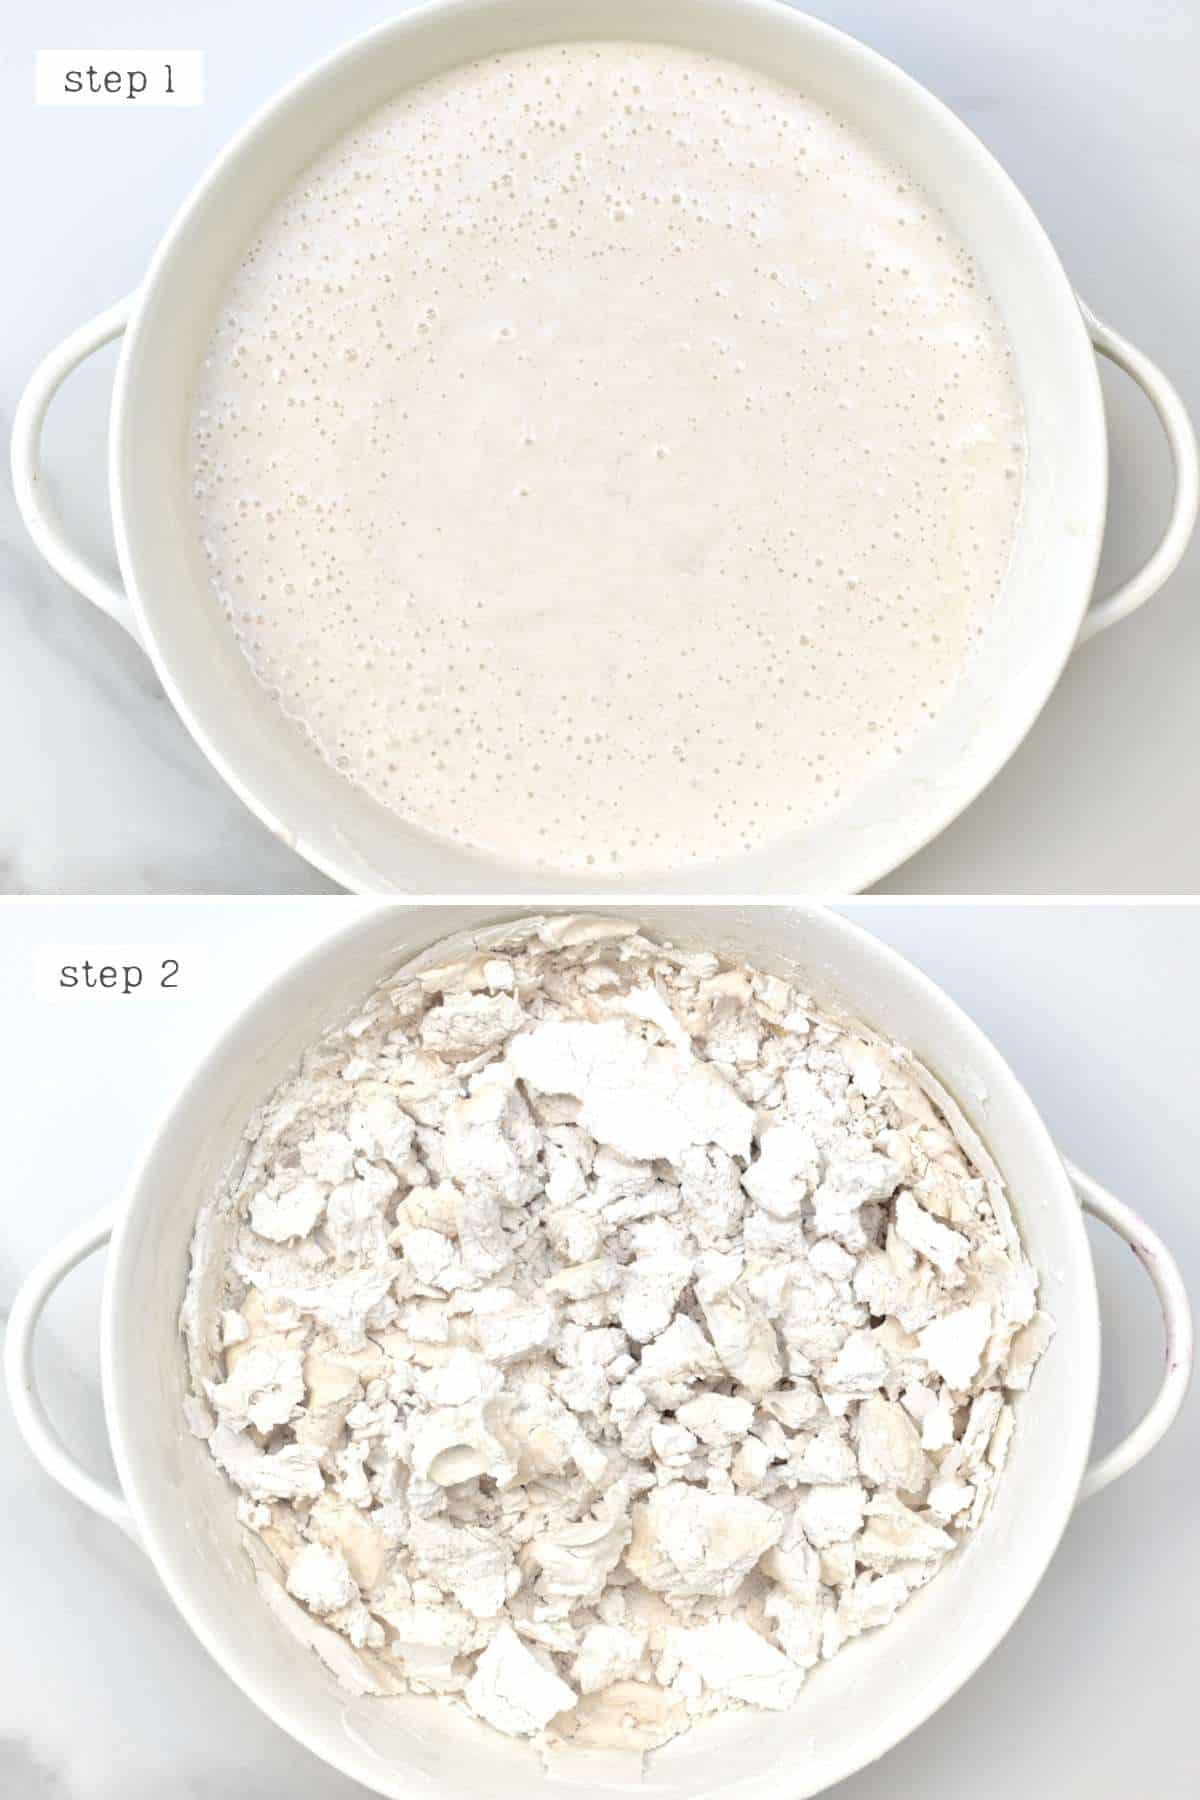 https://www.alphafoodie.com/wp-content/uploads/2021/04/How-to-Make-Flour-Starch-Steps-for-dehydrating-flour-starch.jpg